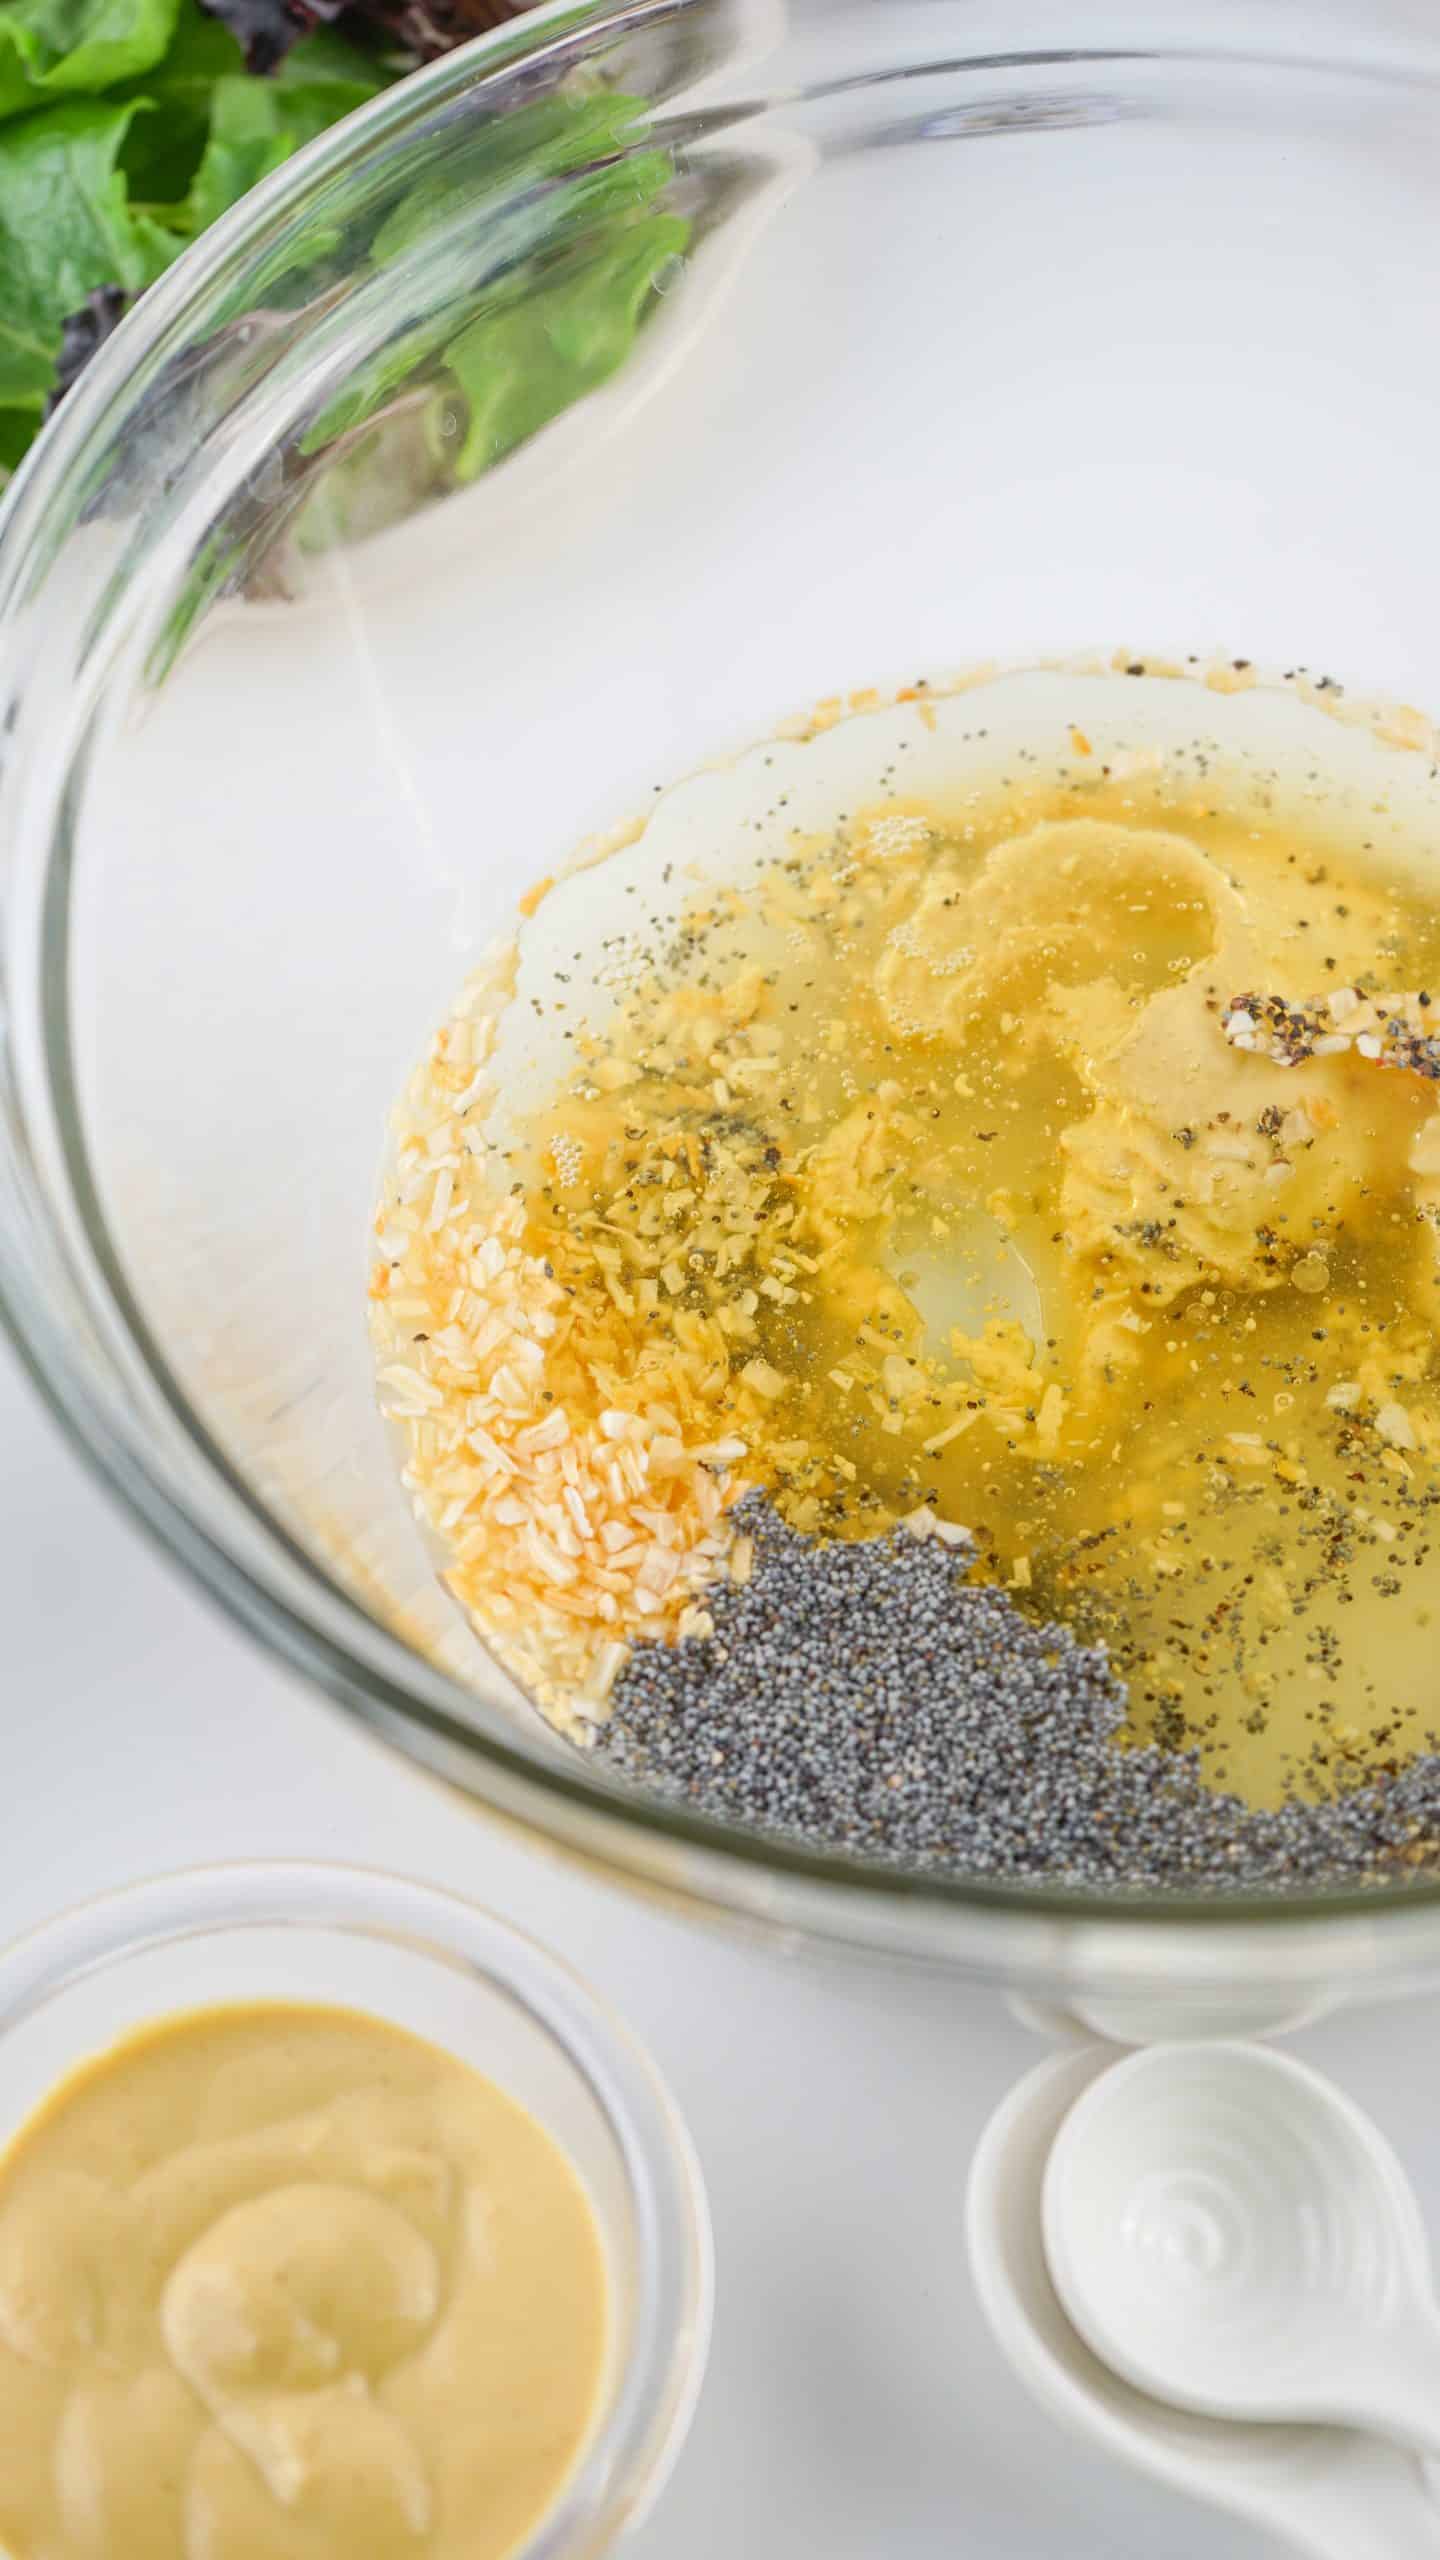 homemade poppy seed dressing ingredients in a glass mixing bowl